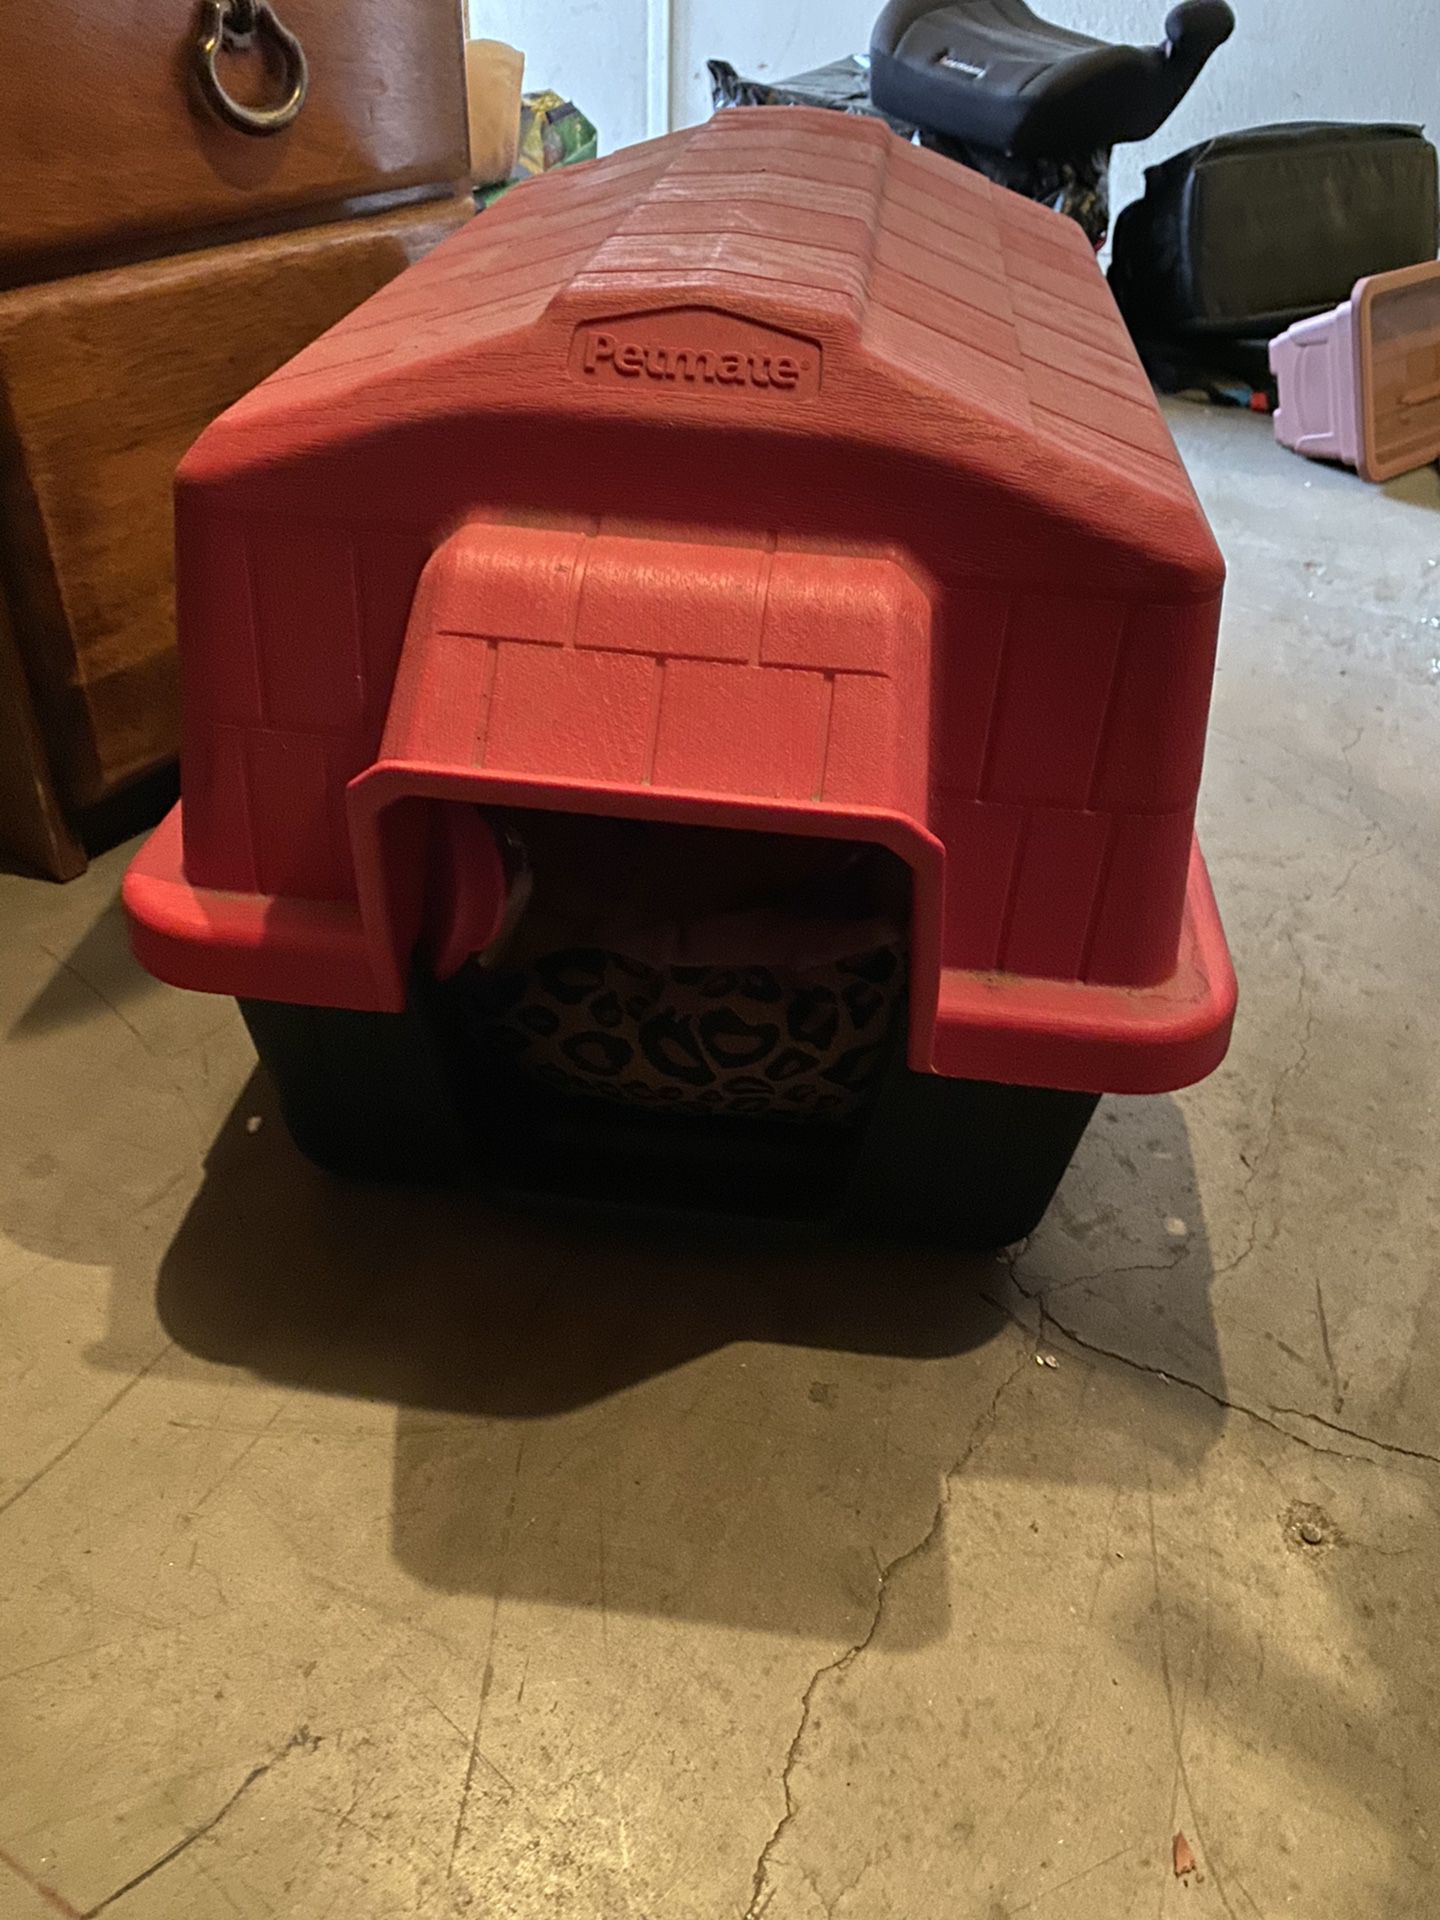 “SMALL” dog house.